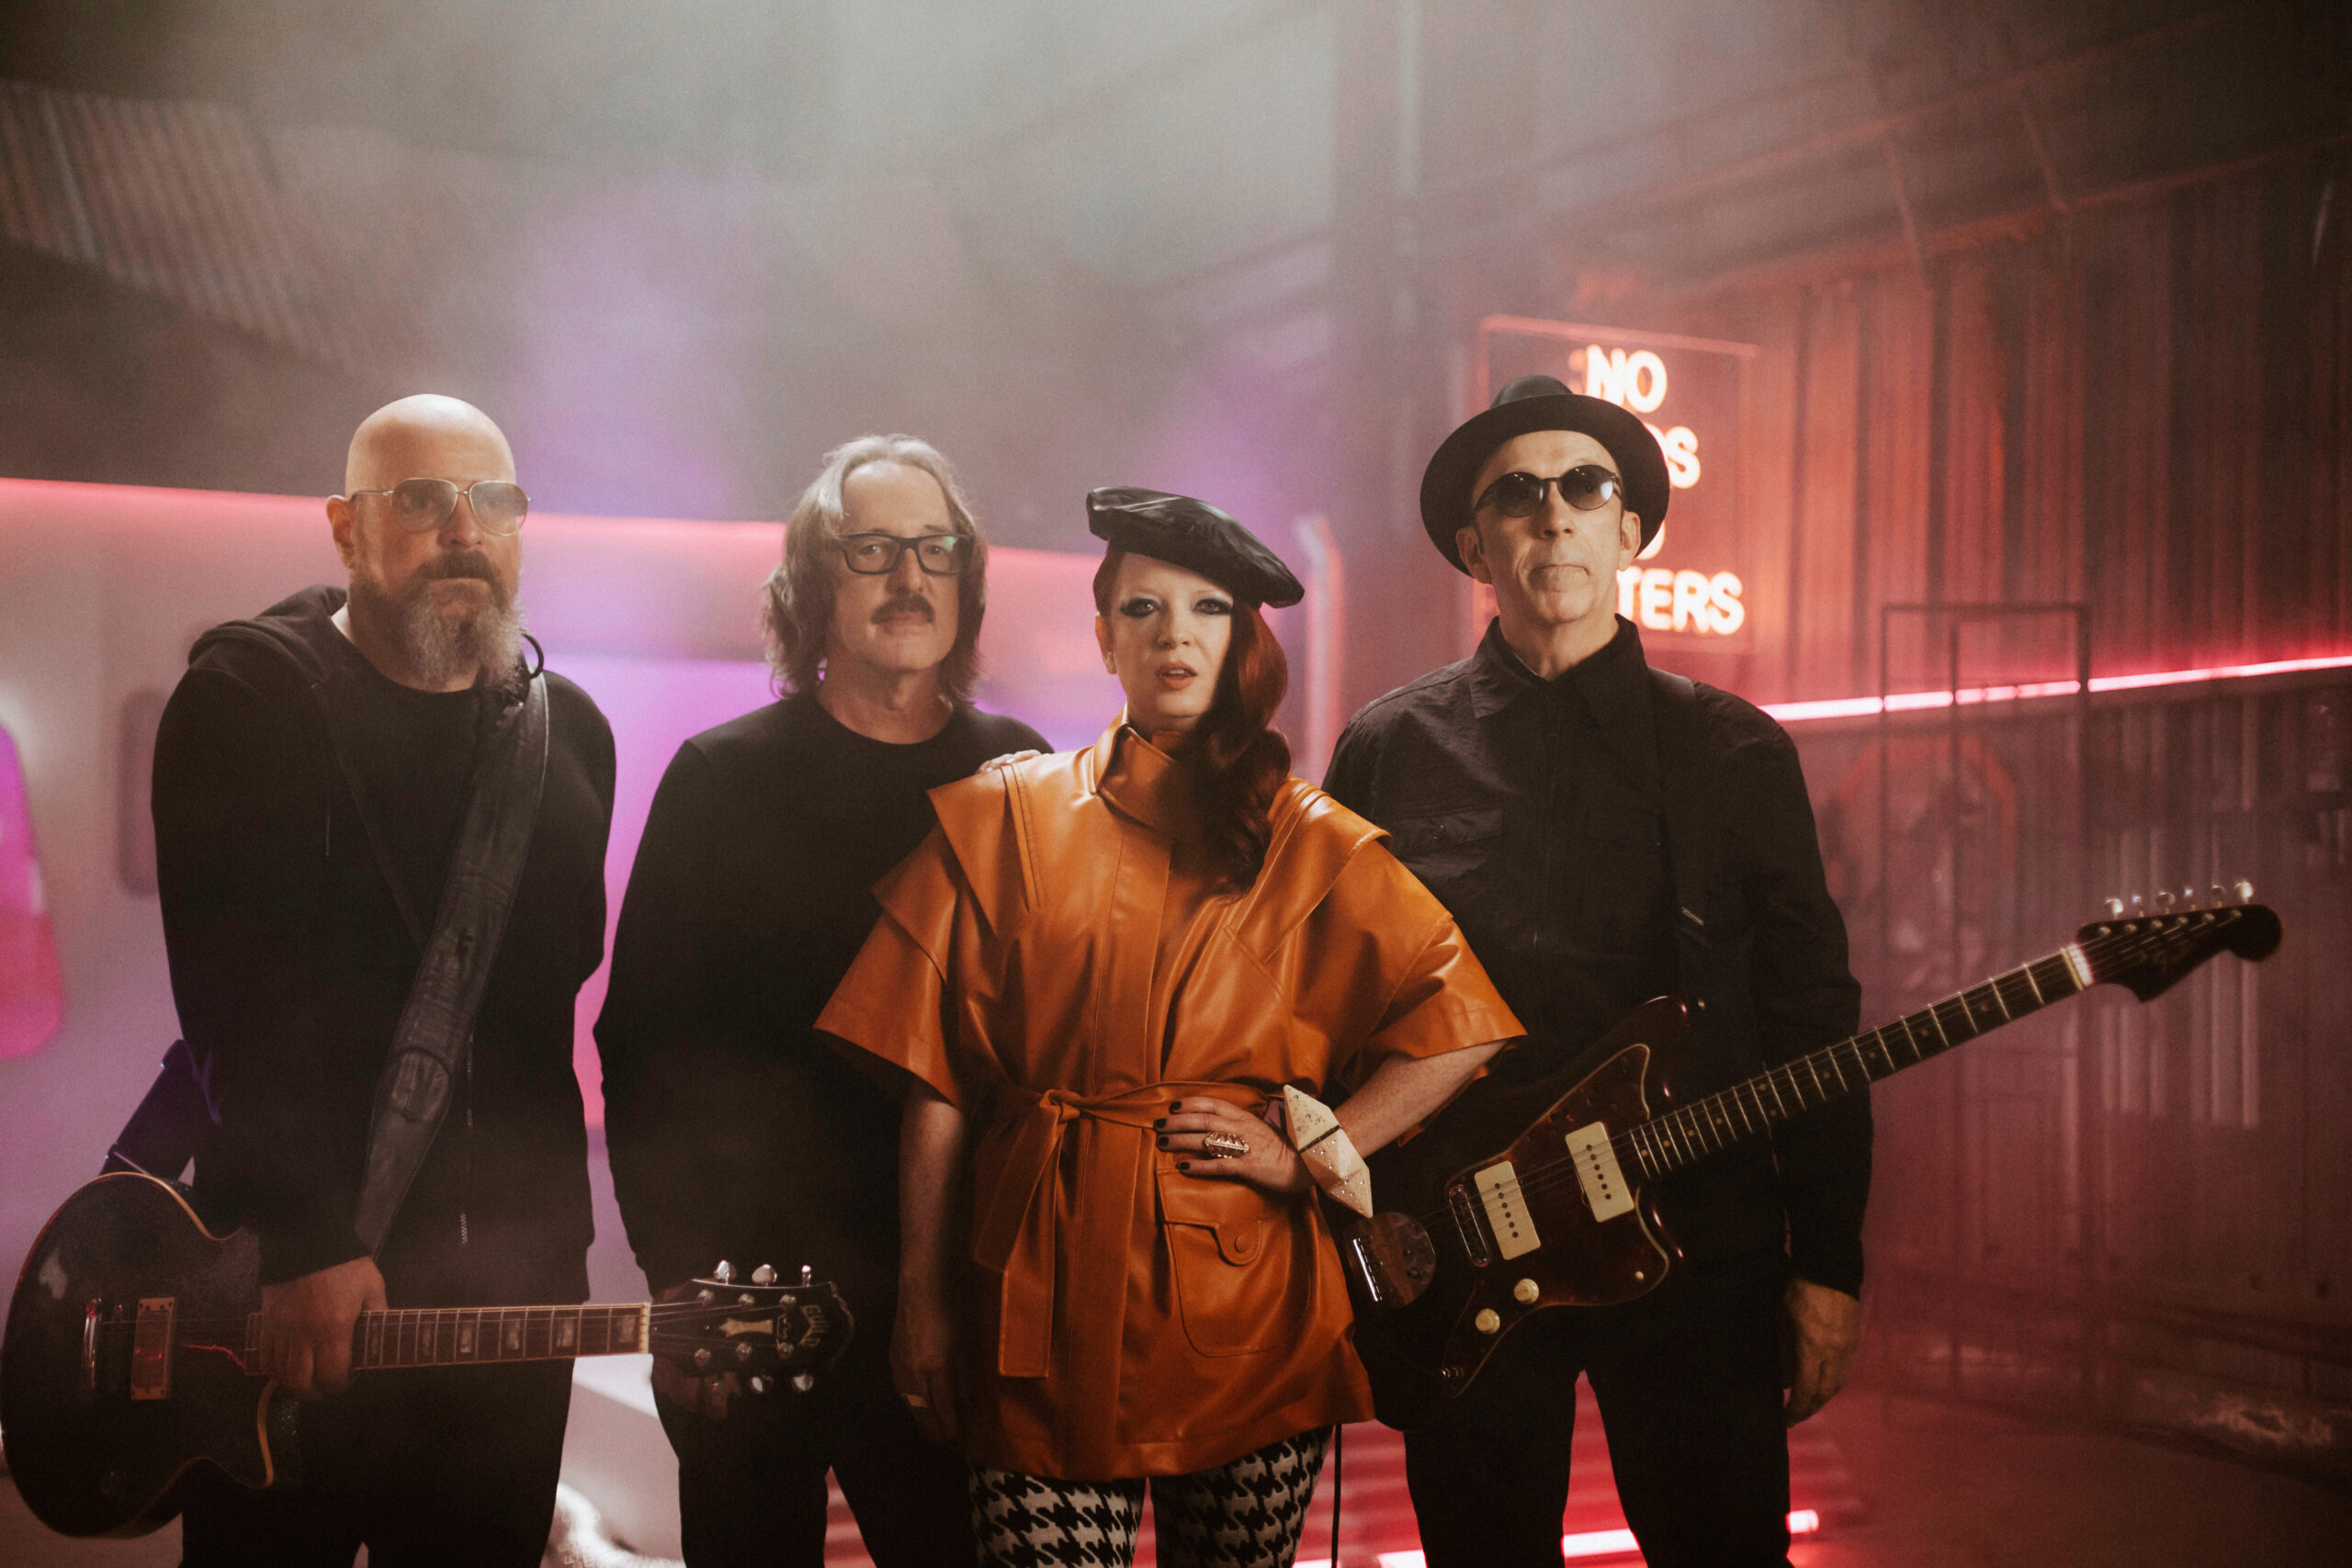 GARBAGE NEW ALBUM ‘NO GODS NO MASTERS’ IS OUT NOW